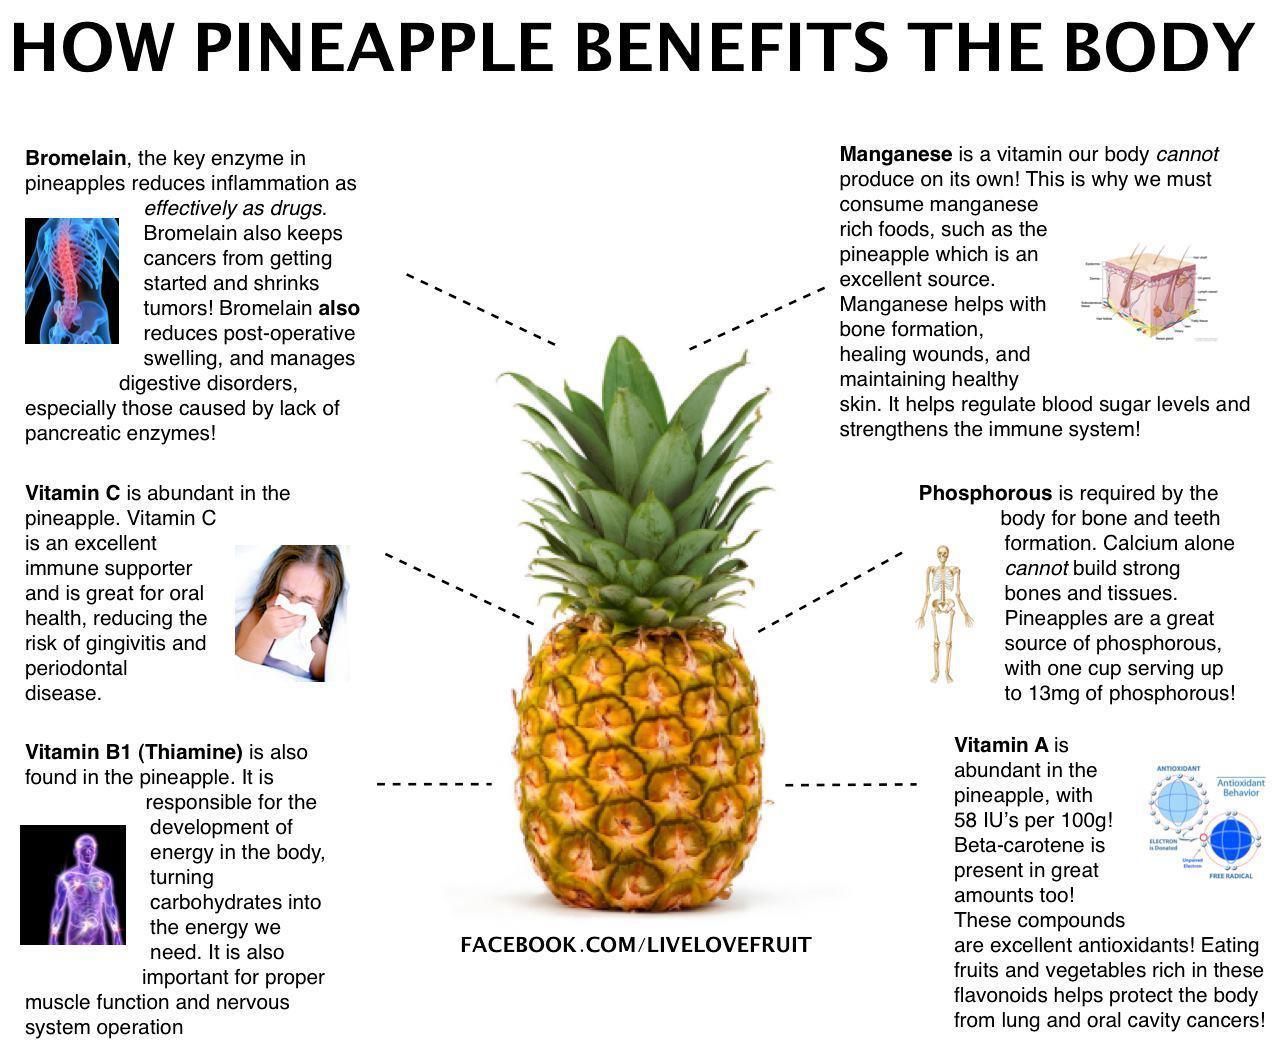 How Pineapple Benefits the Body